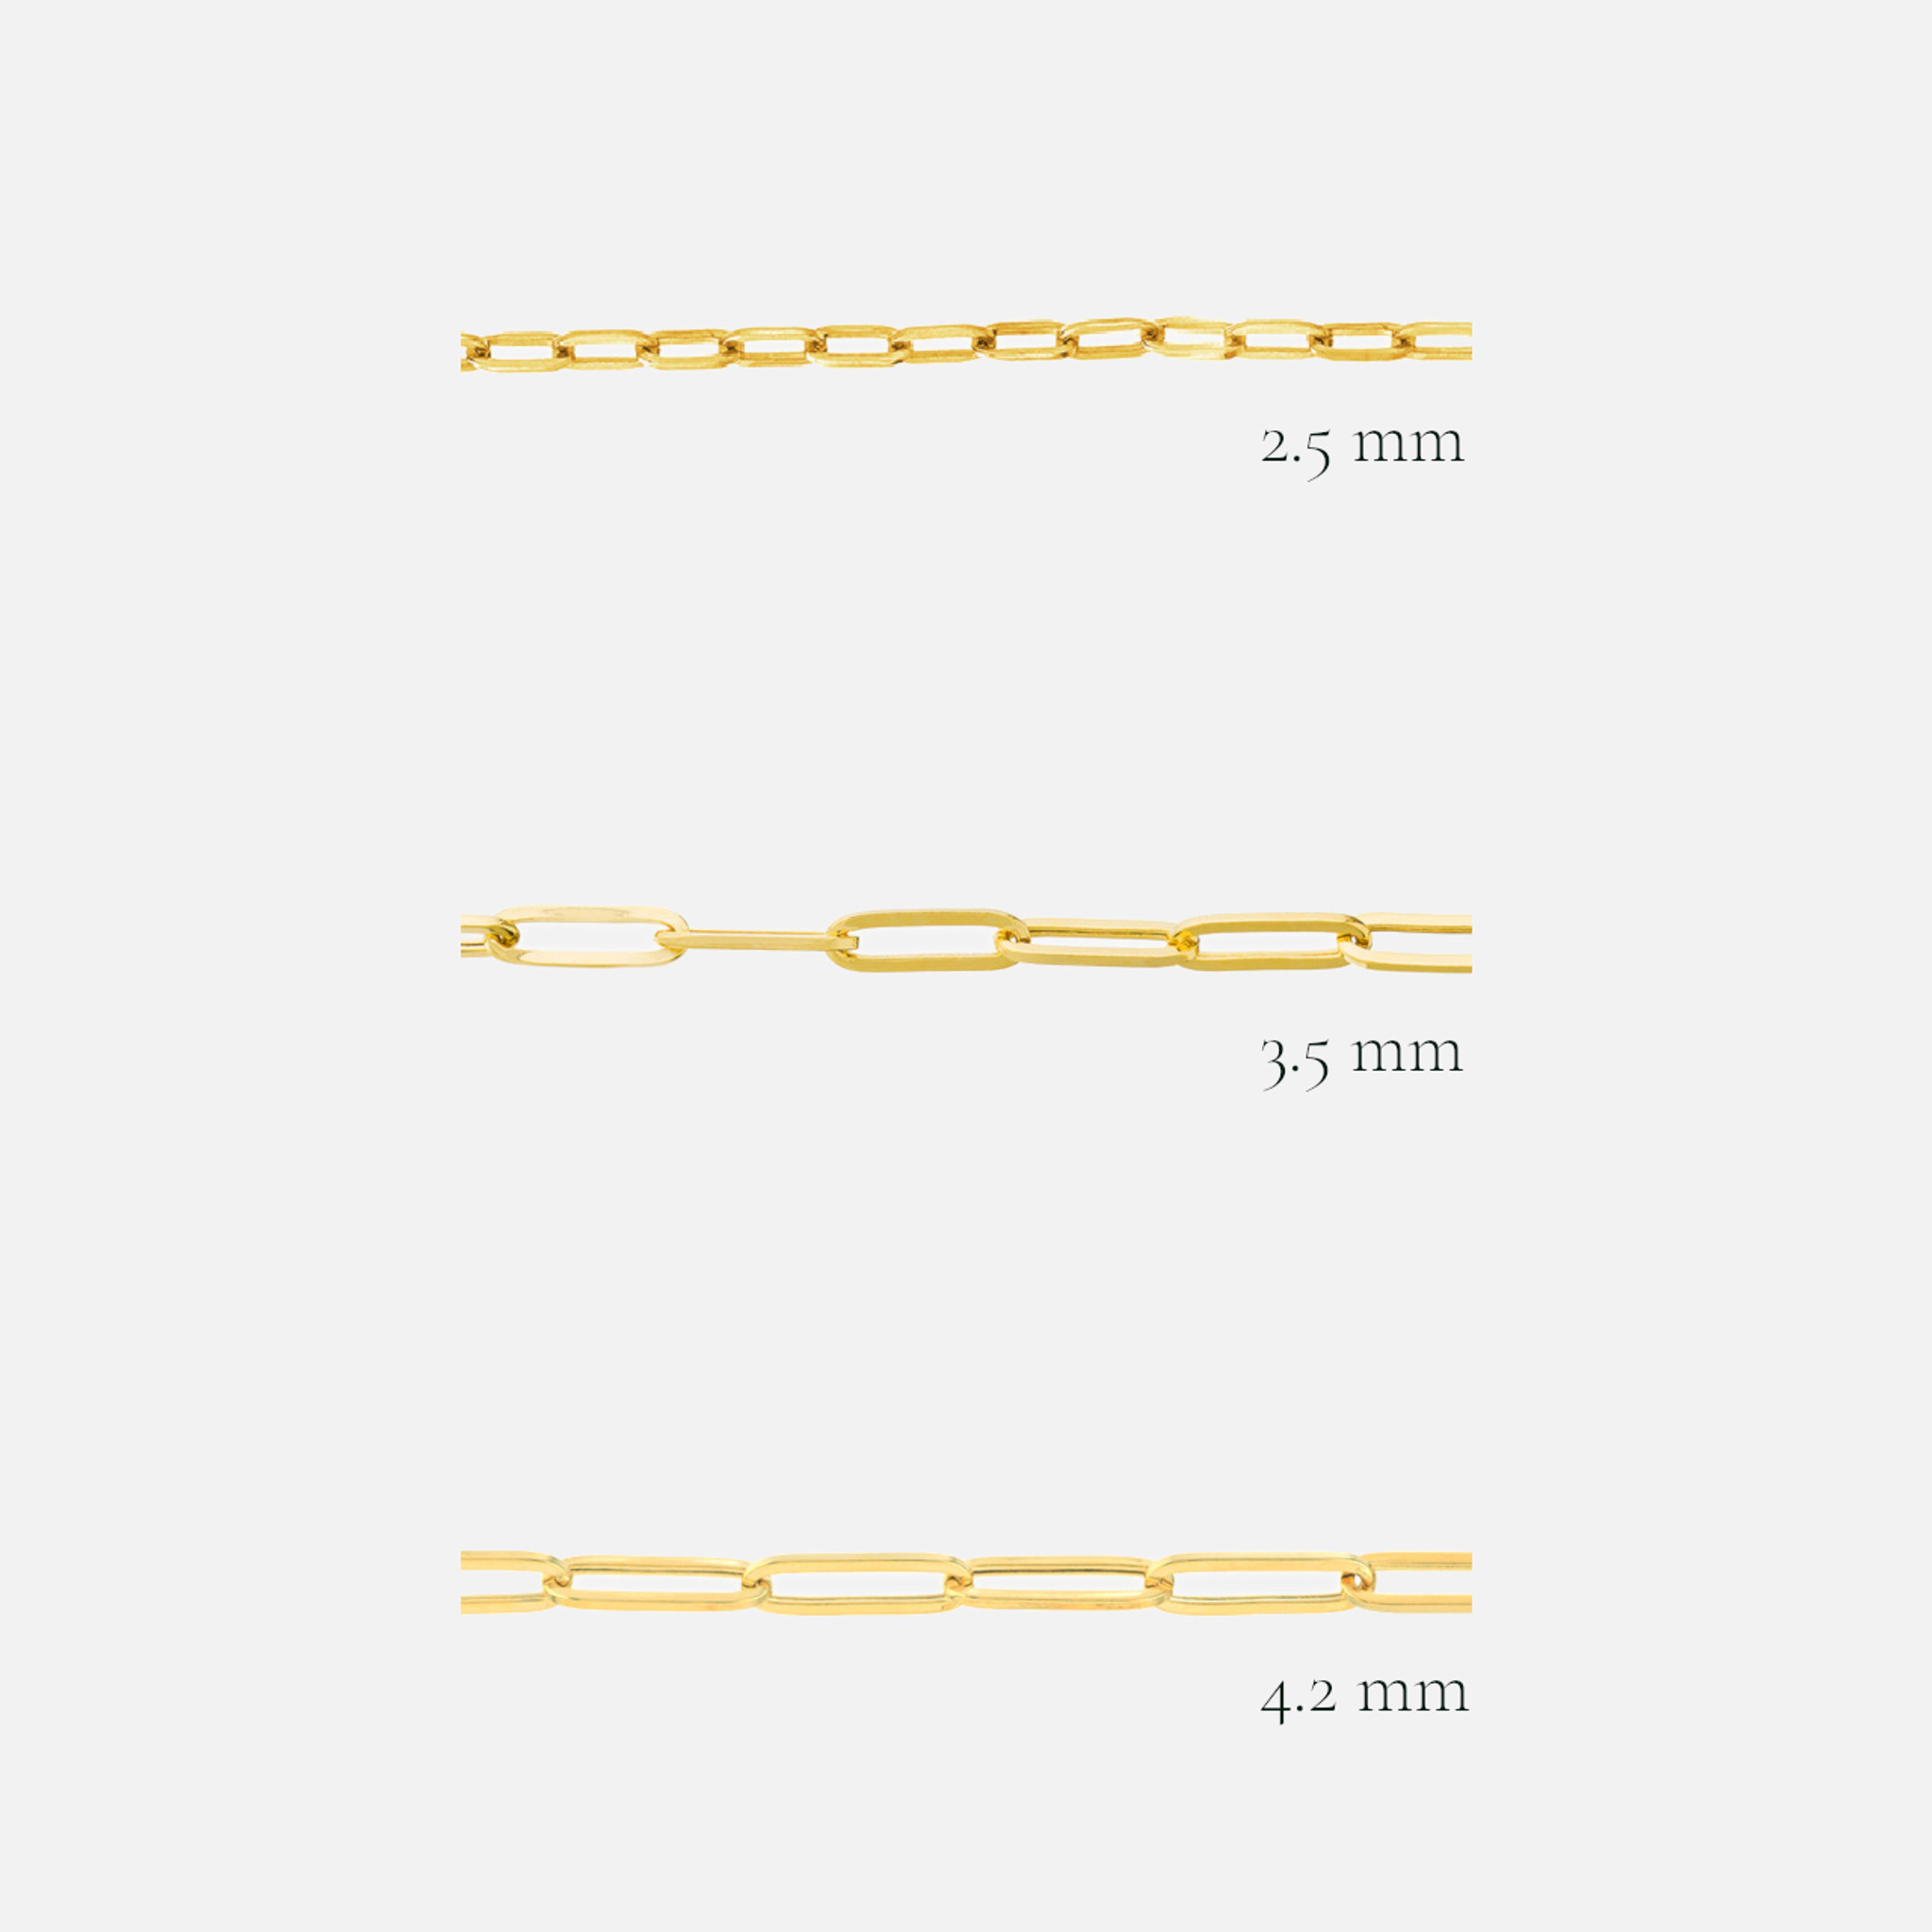 Close-up view of gold paperclip chain necklace, available in 2.5mm, 3.5mm, and 4.2mm sizes, highlighting versatile options.